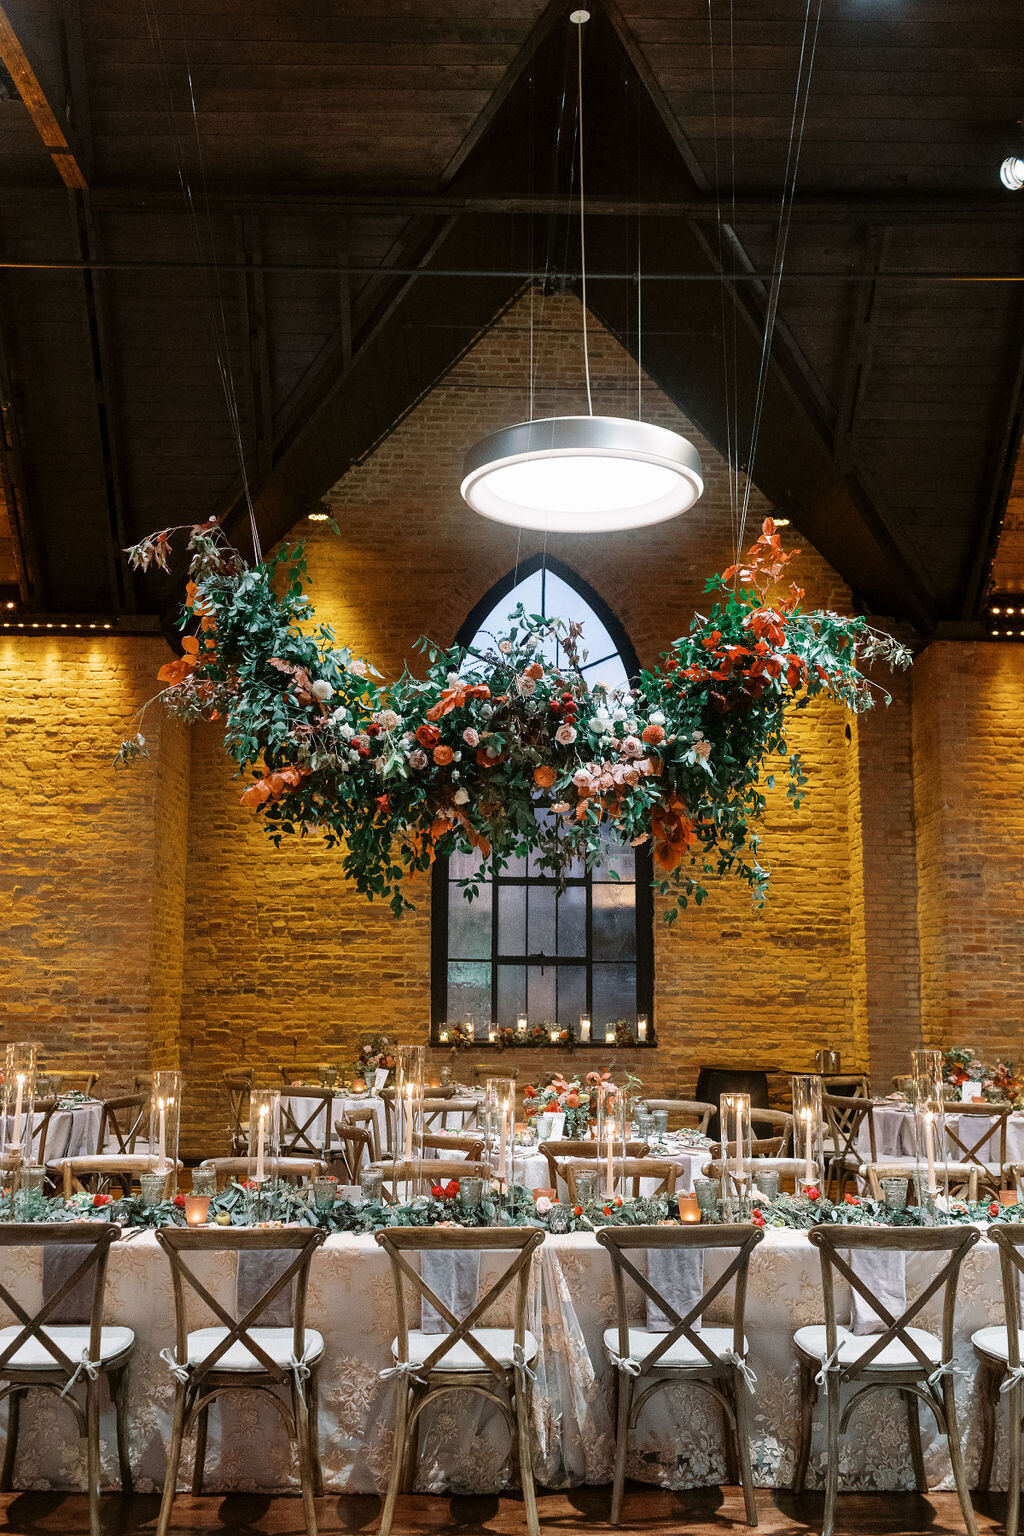 Gorgeous hanging installation of fall foliage, lush greenery and florals over the ceremony turned reception space enhancing the warm, natural atmosphere. Designed by Rosemary and Finch in Nashville, TN.